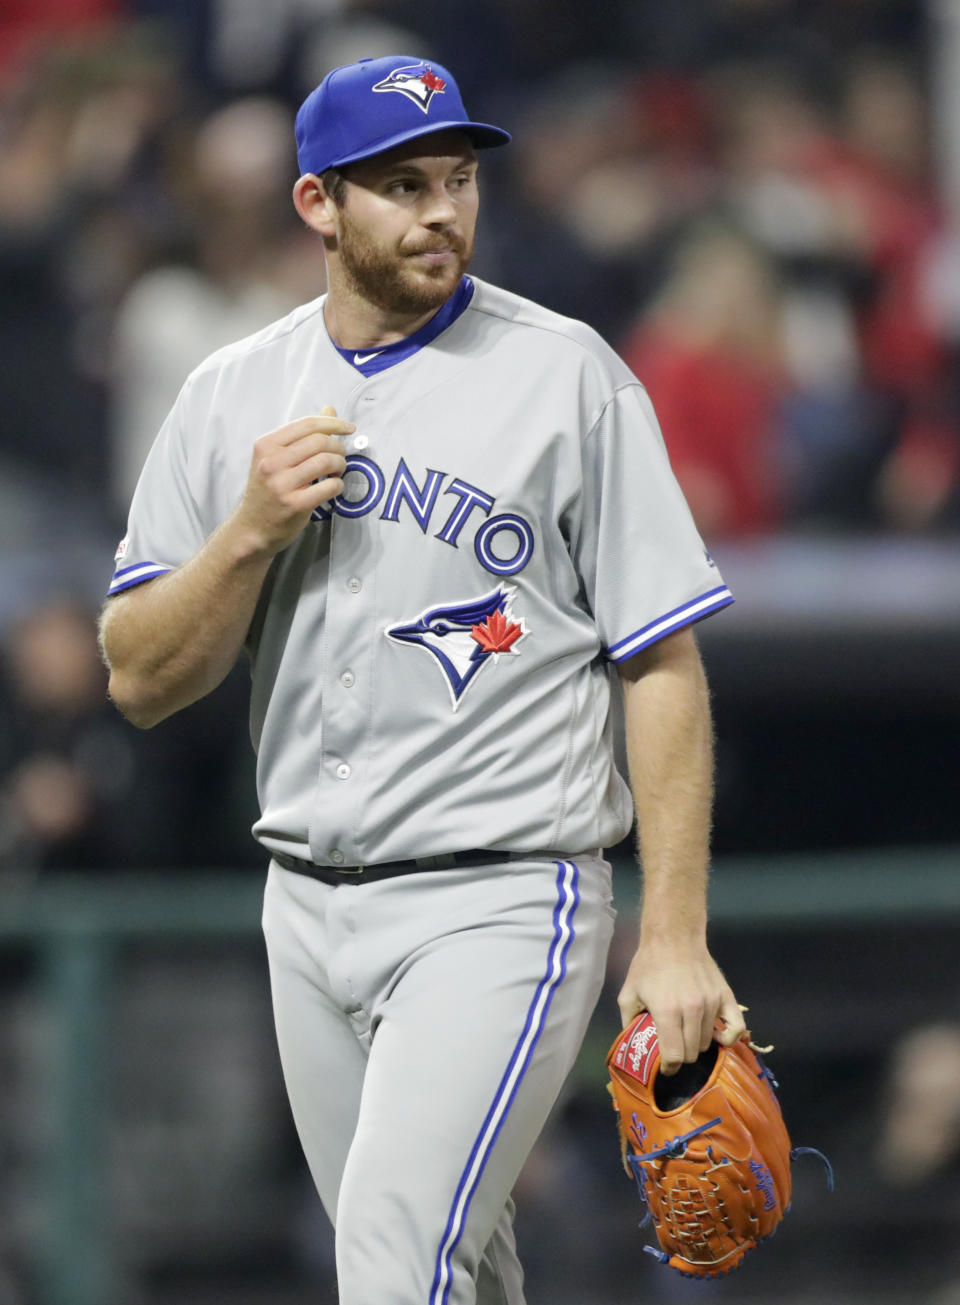 Toronto Blue Jays relief pitcher Joe Biagini walks off the field after Cleveland Indians' Carlos Santana hit a solo home run during the ninth inning of a baseball game, Friday, April 5, 2019, in Cleveland. The Indians won 3-2. (AP Photo/Tony Dejak)